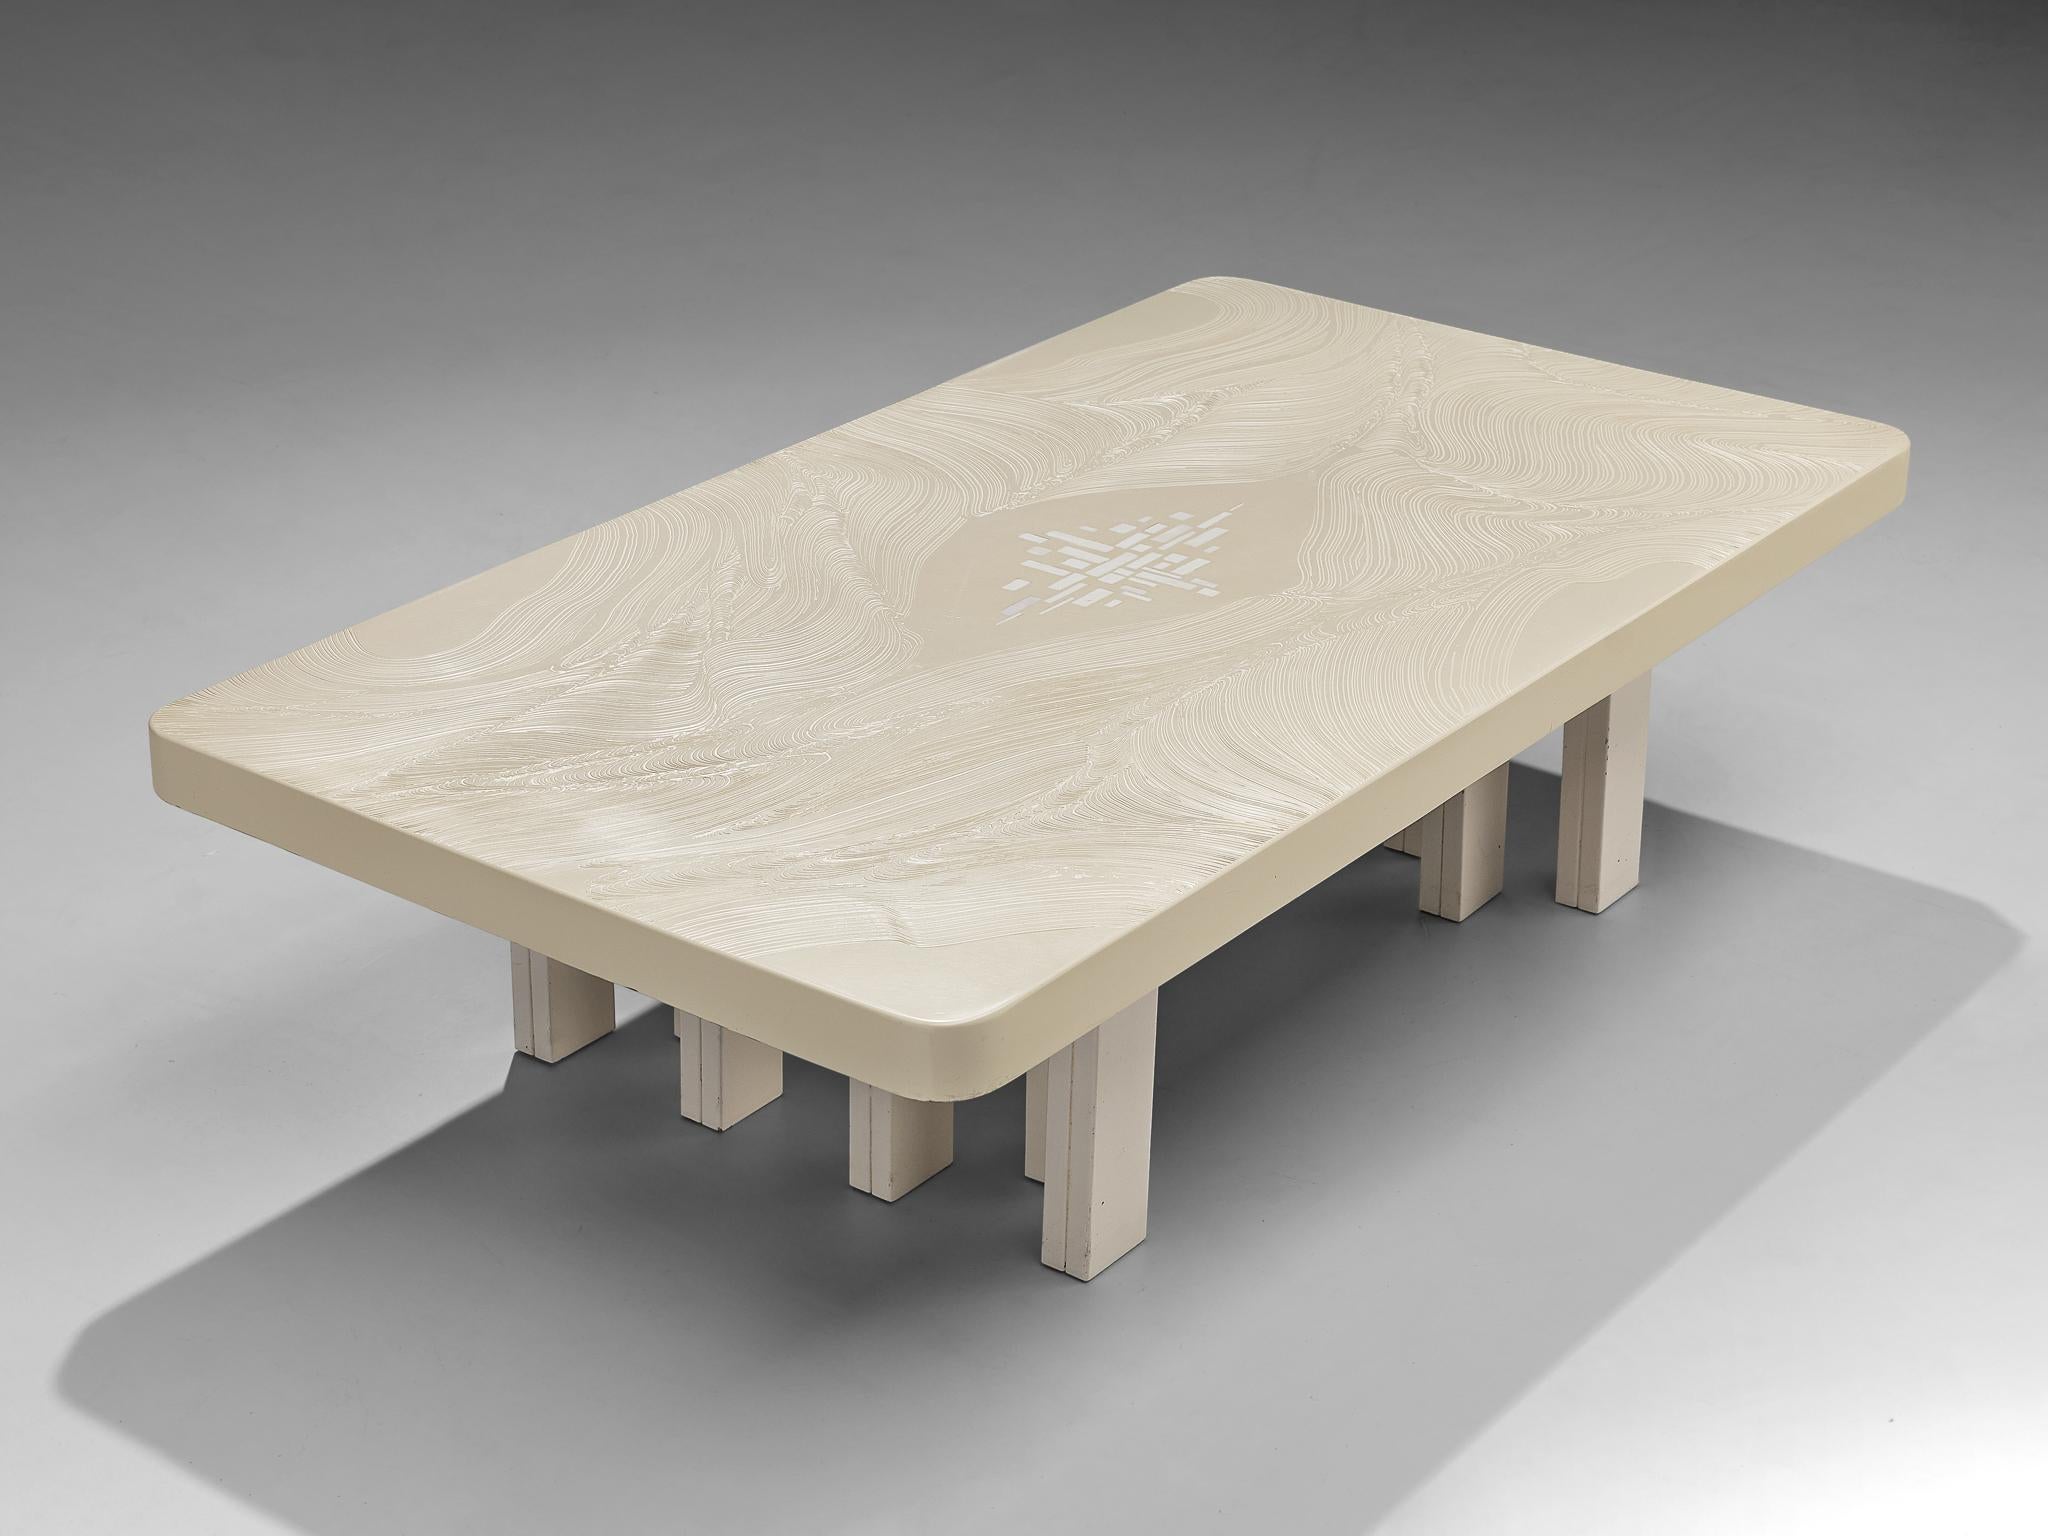 Jean Claude Dresse, coffee table, resin, bone inlay, lacquered steel, Belgium, circa 1973

A luxurious coffee table crafted with high attention for detail which is characteristic for the work of the Belgian artist Jean Claude Dresse. The table has a